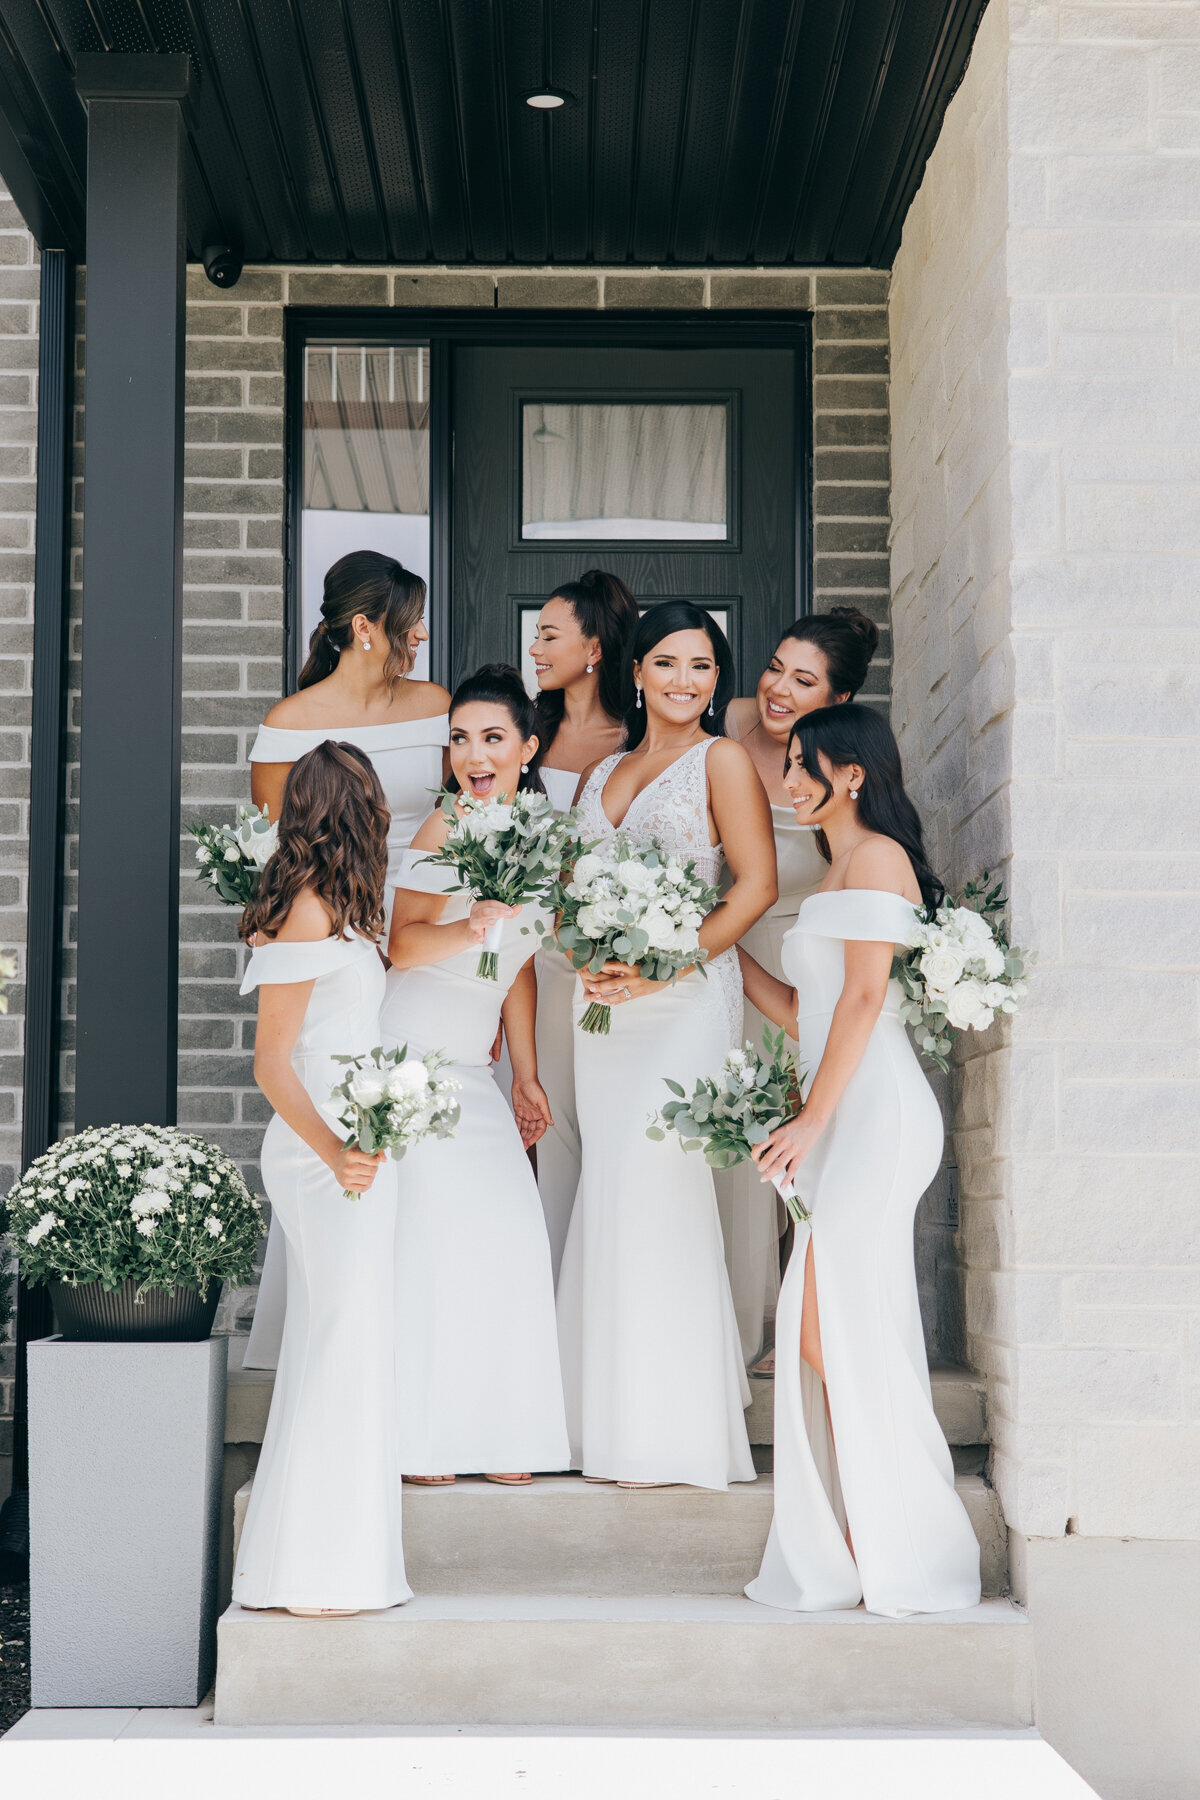 Bridesmaids in matching white dresses